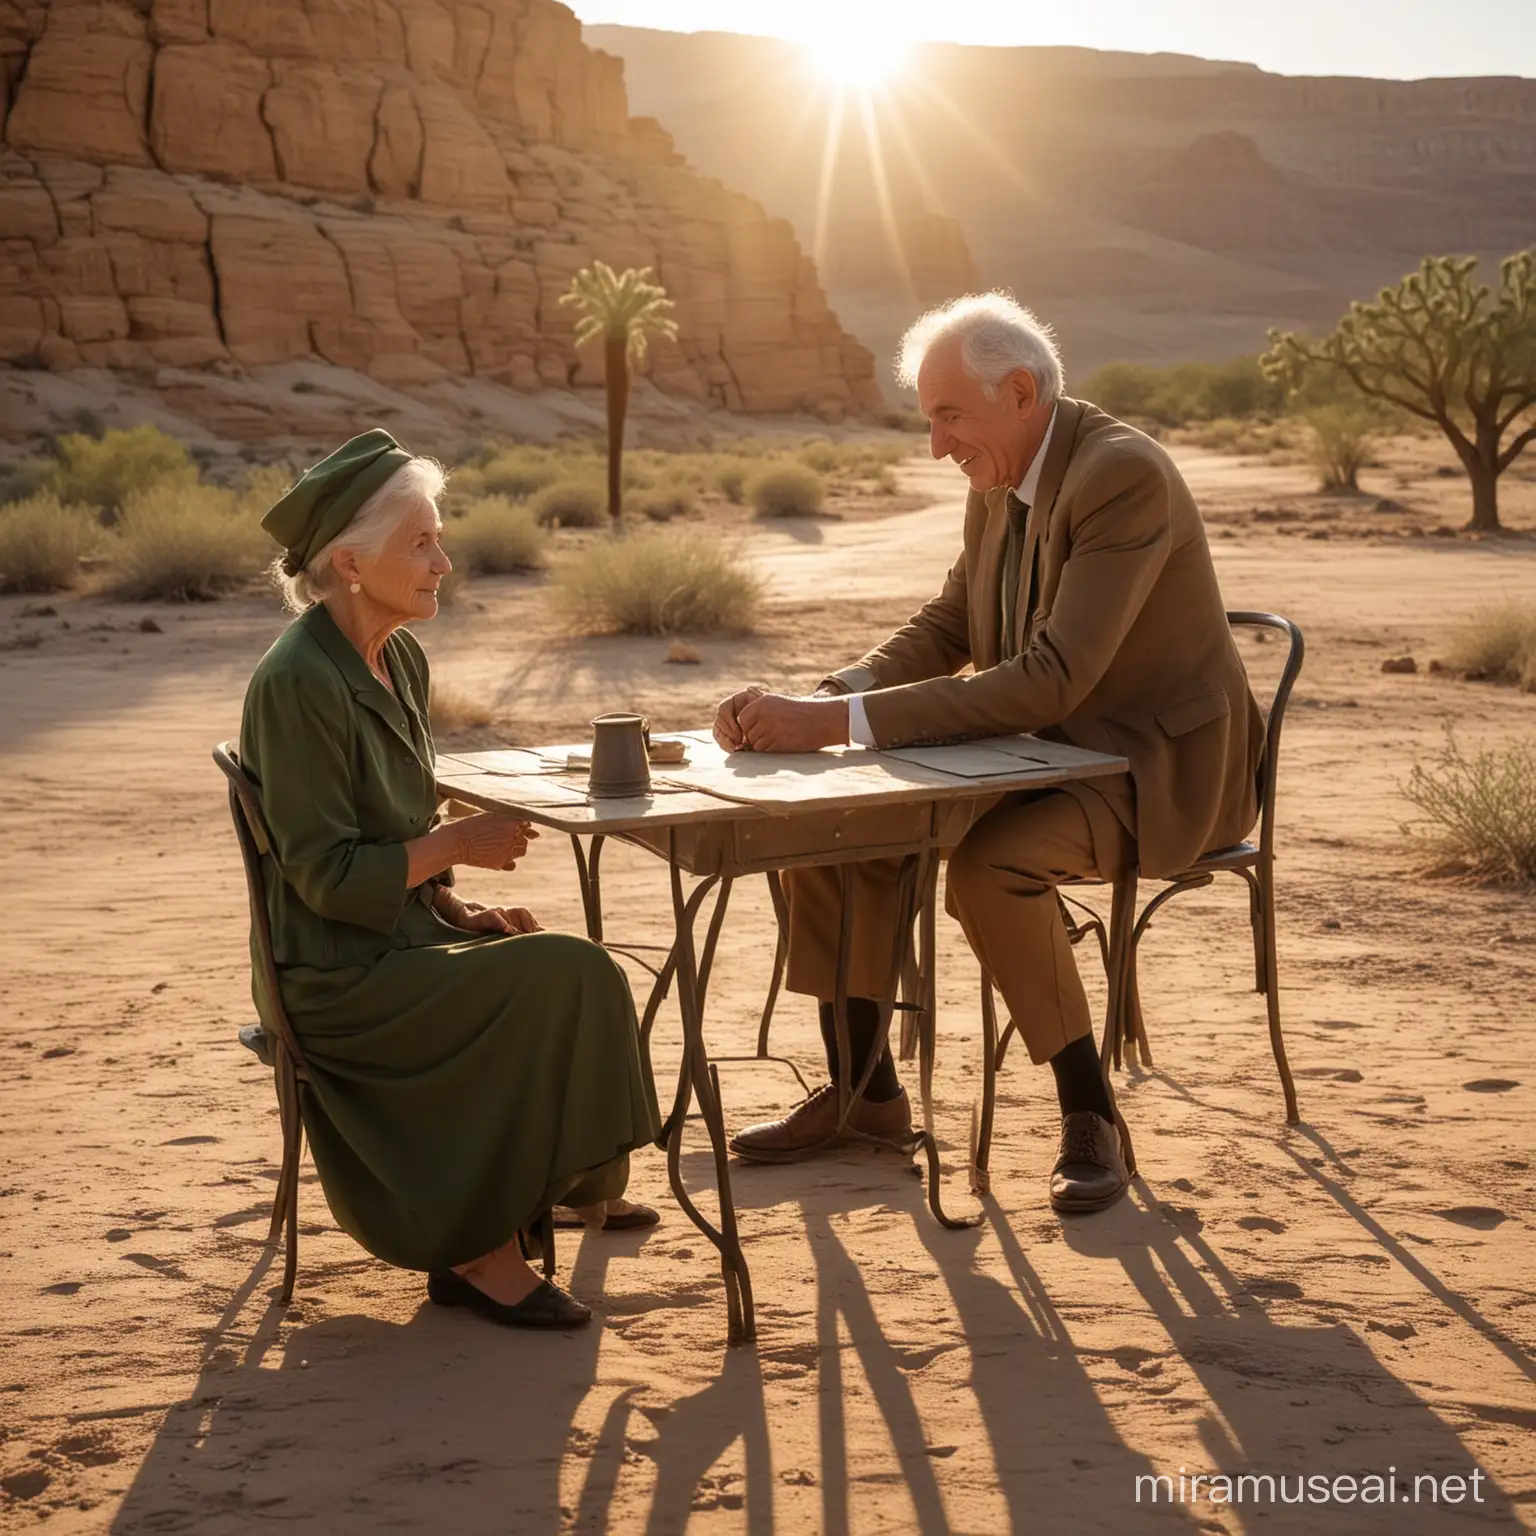 Time in a bottleon table, arid desert, old man in a brown suit with a tie, old woman in a dark green dress, sitting at a simple table, the sun is starting to set